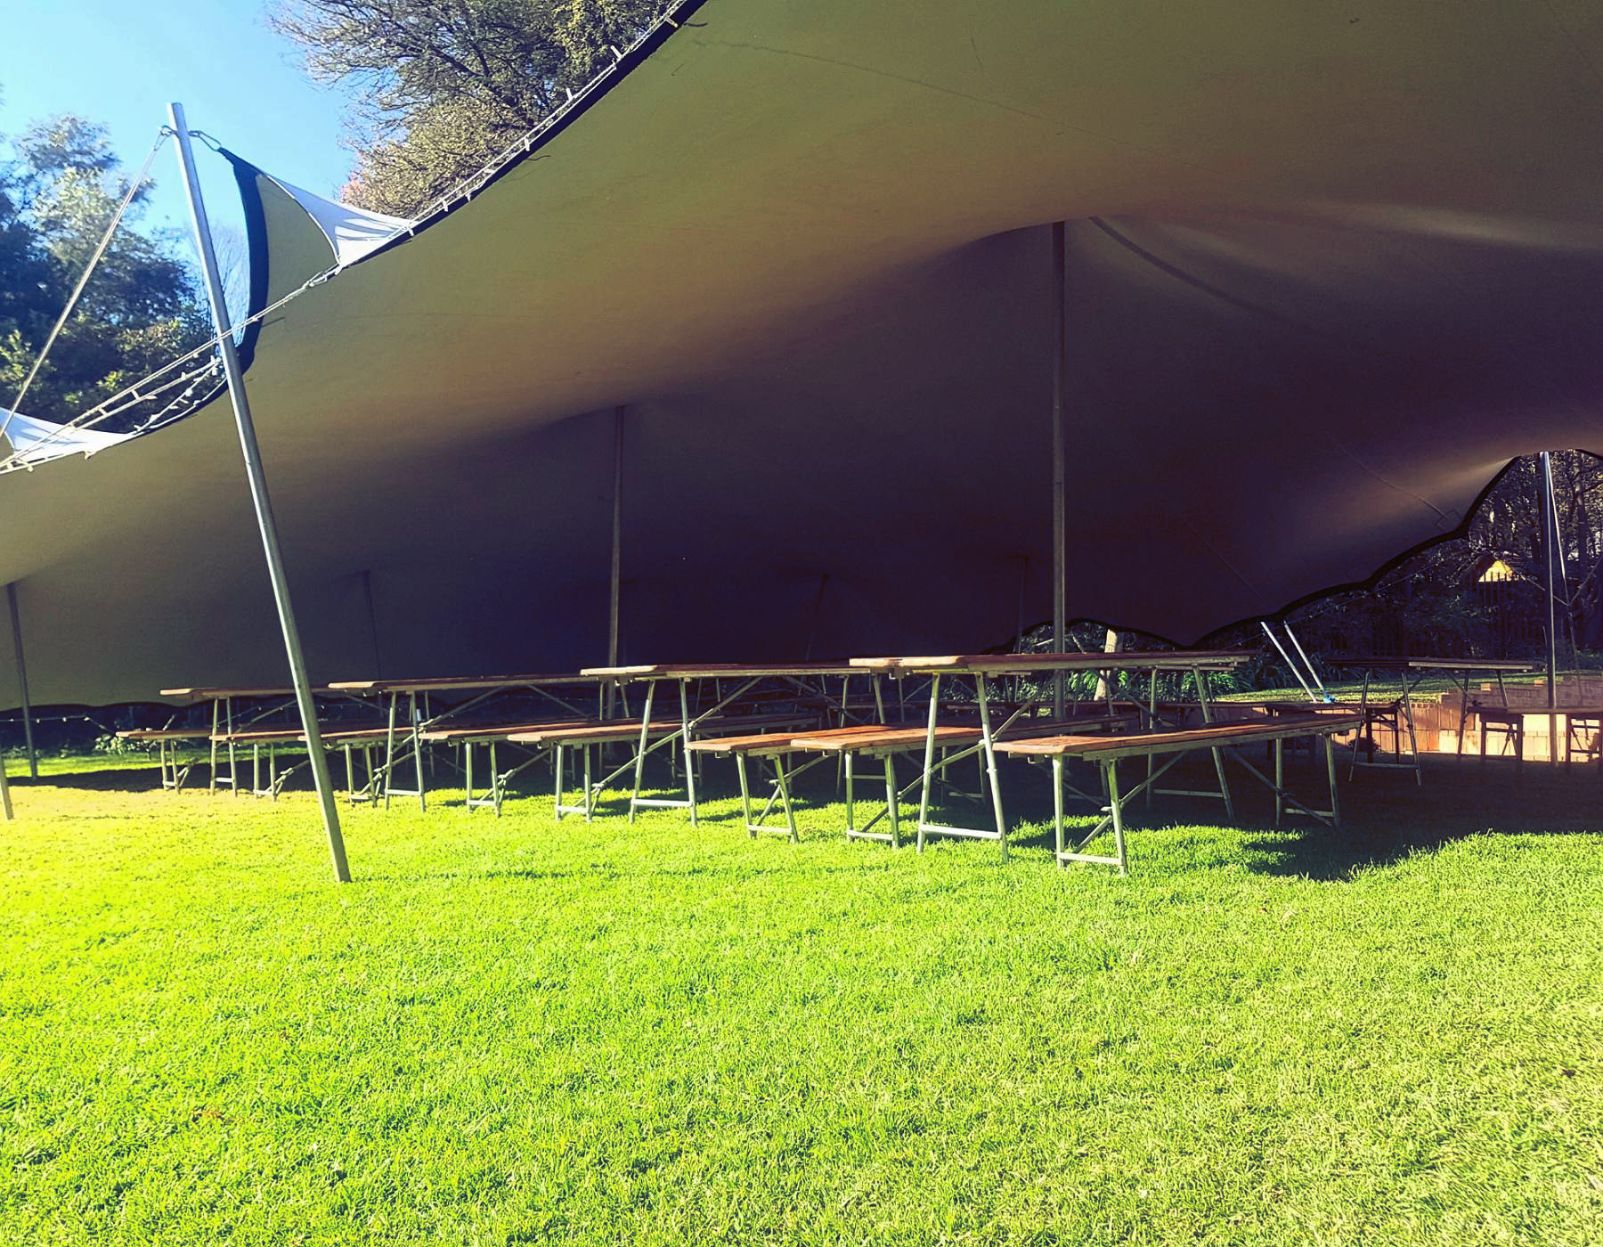 Large Tent Canopy With Benches On Grass.